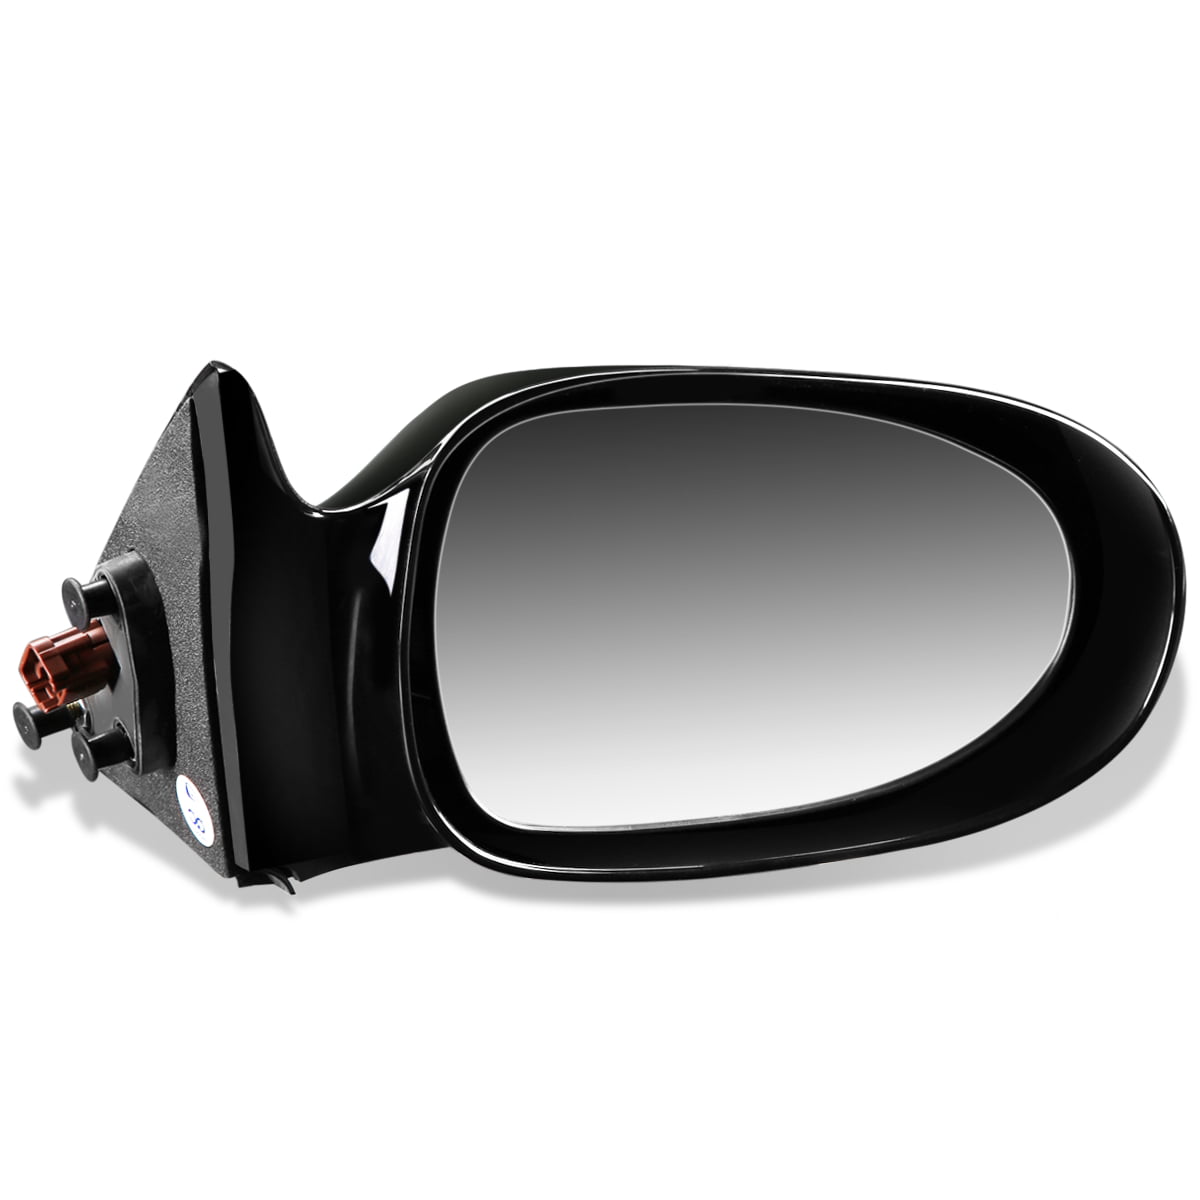 Driver Side New Mirror for Nissan Altima NI1320125 2000 to 2001 